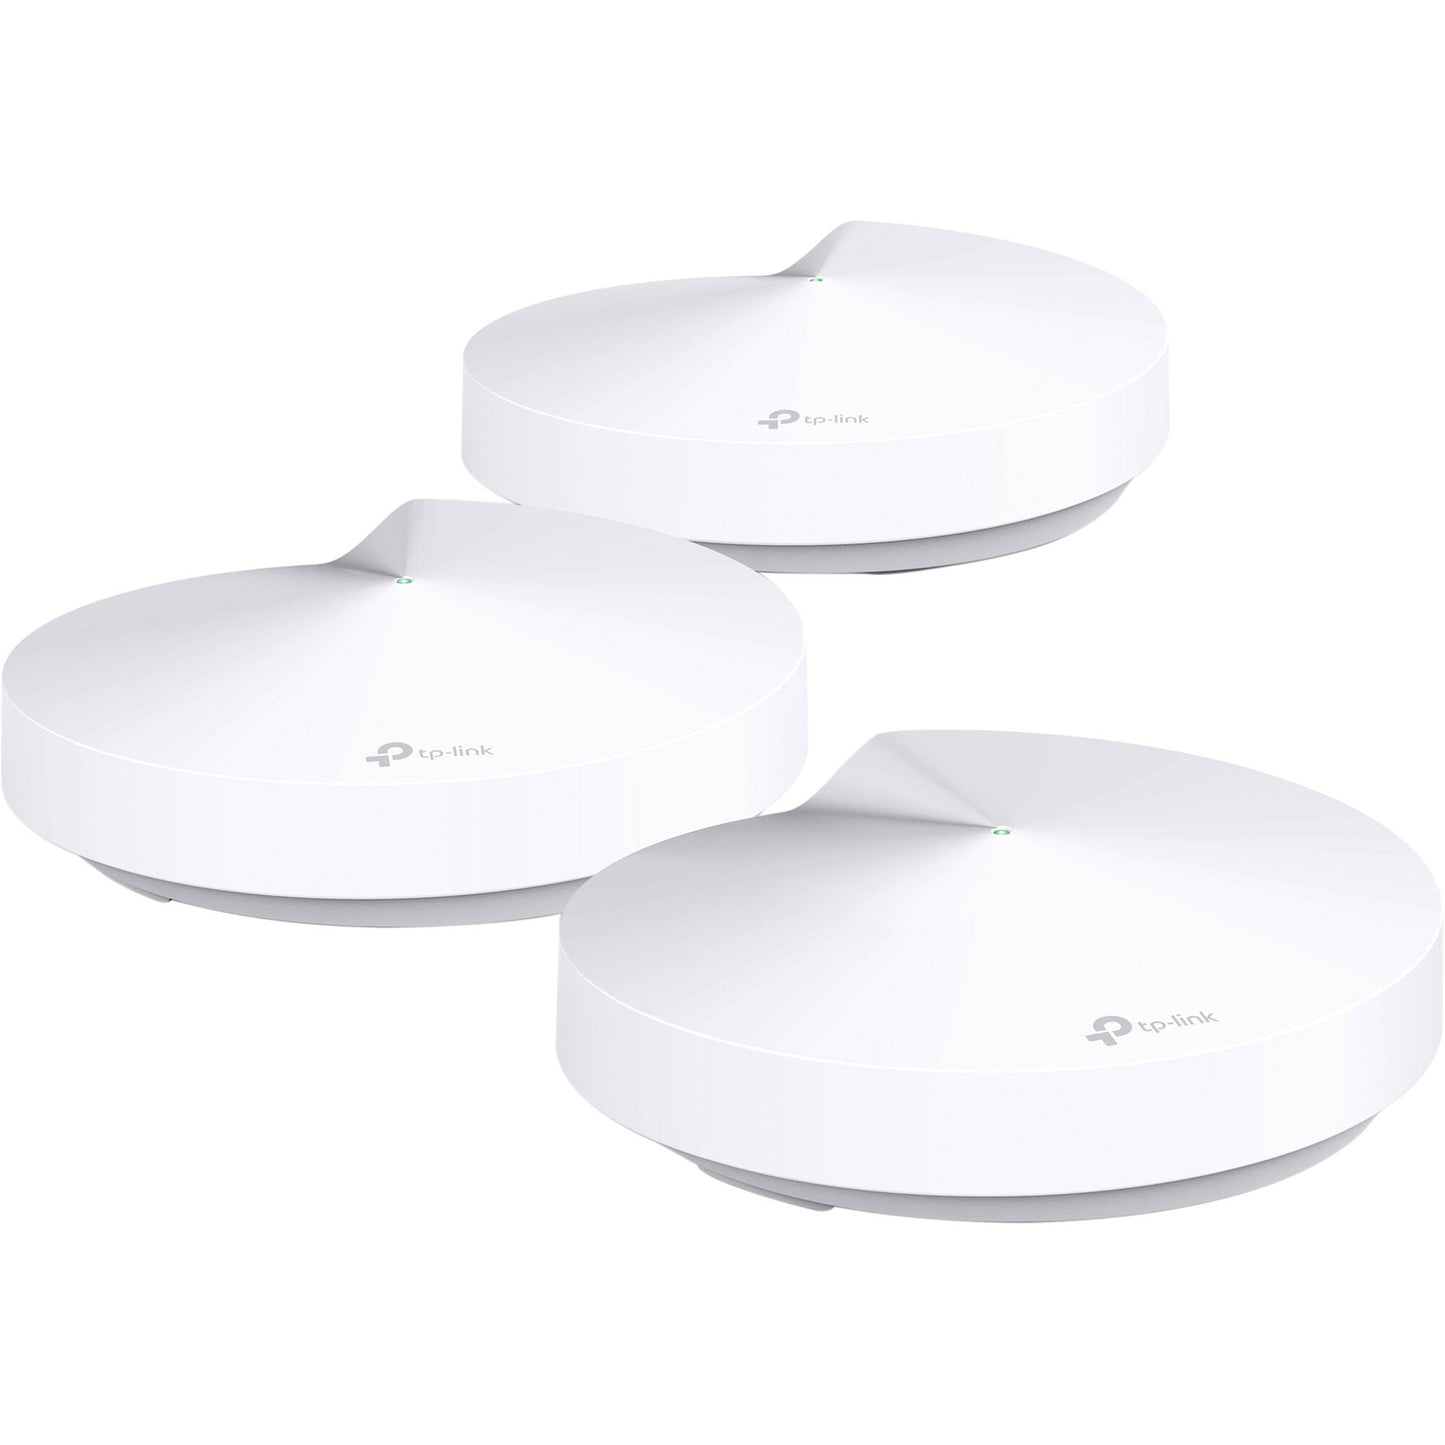 TP Link AC2200 Smart Home Mesh WiFi System - Deco M9 Plus (3 Pack)